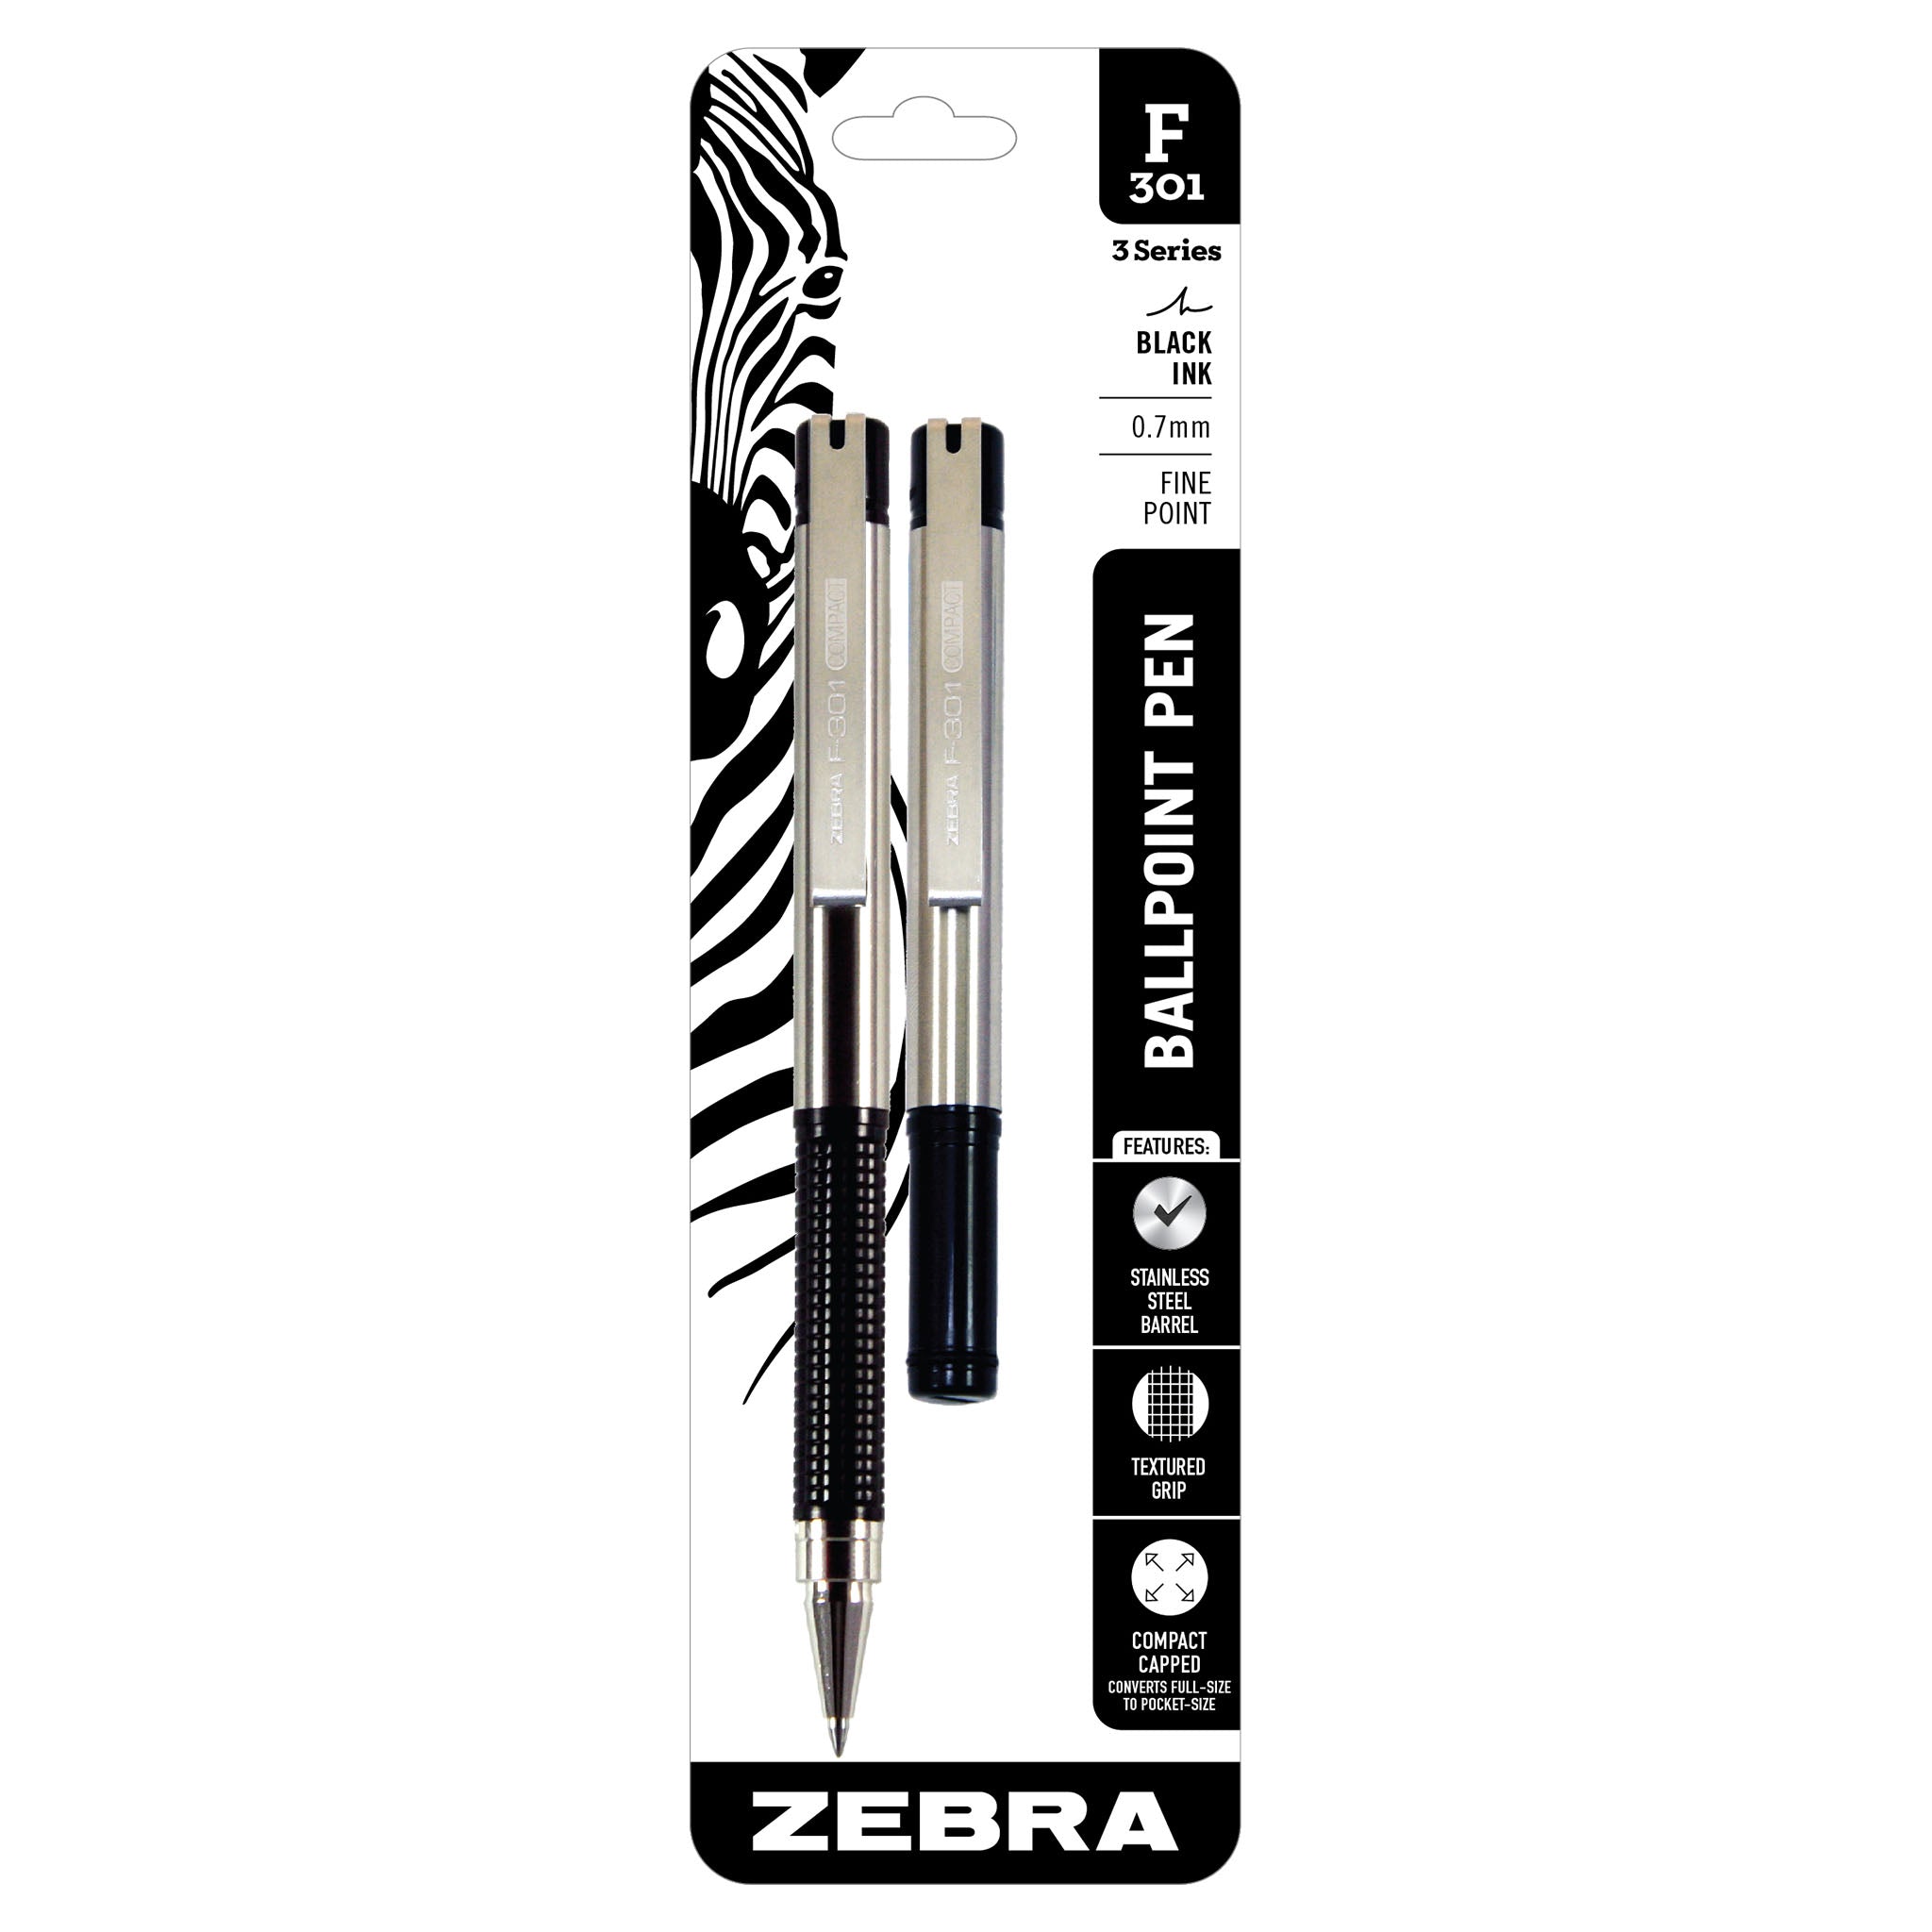 UMSL Triton Store - Zebra F-301 Compact Stainless Steel Stick Pen